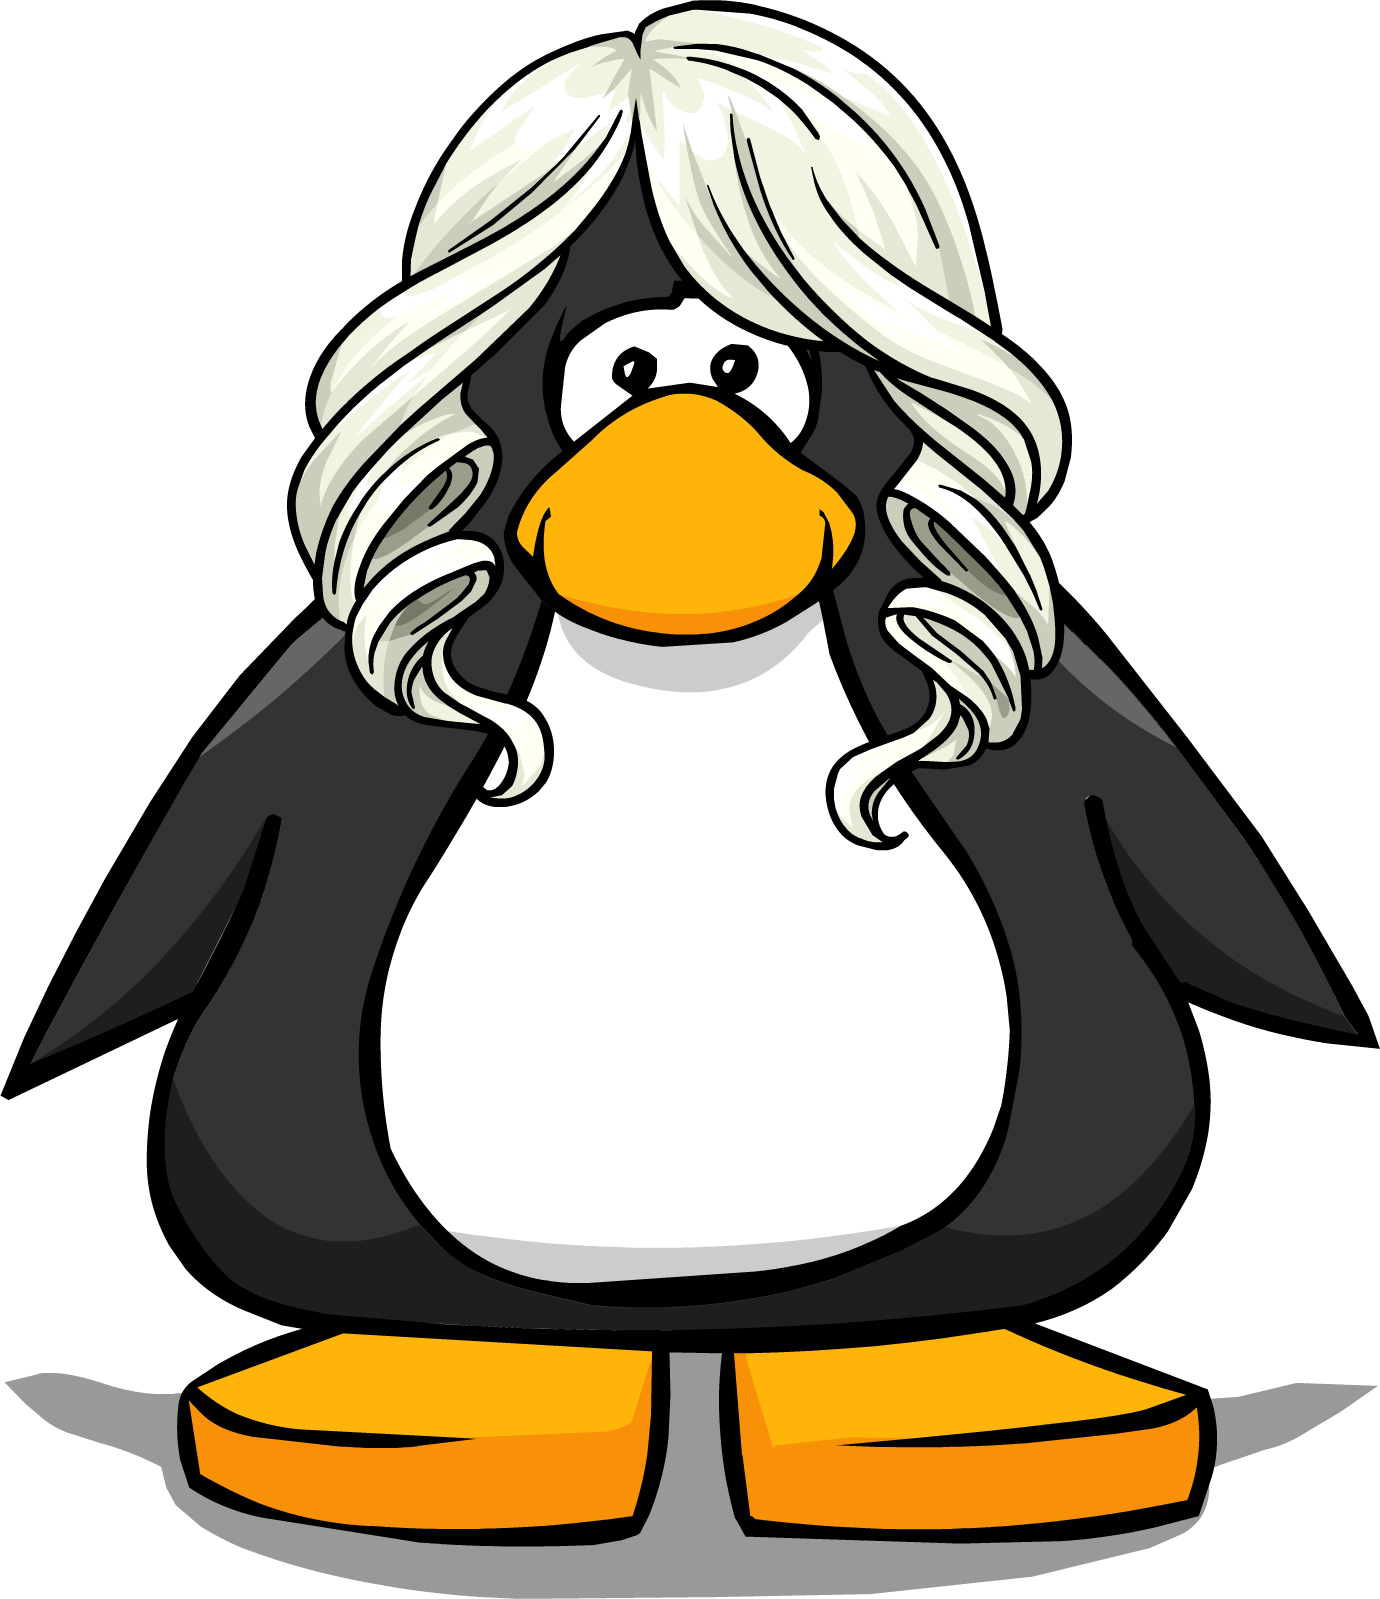 The Whipped Cream Player Card - Club Penguin Grey Penguin (1380x1599)